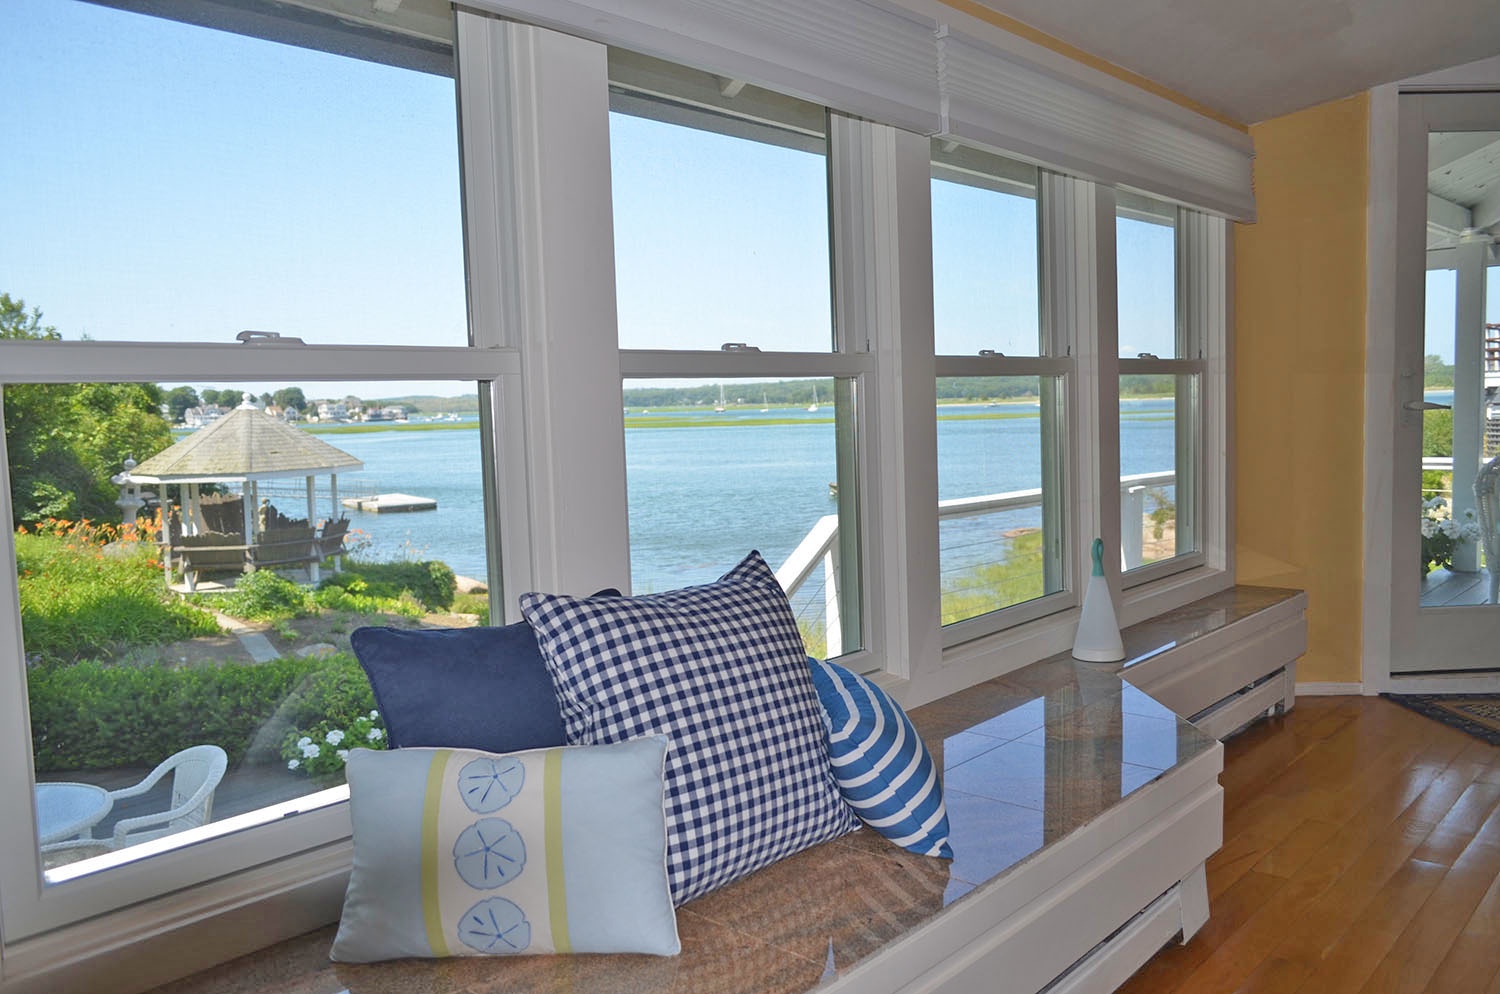 Large picture windows provide amazing river views.